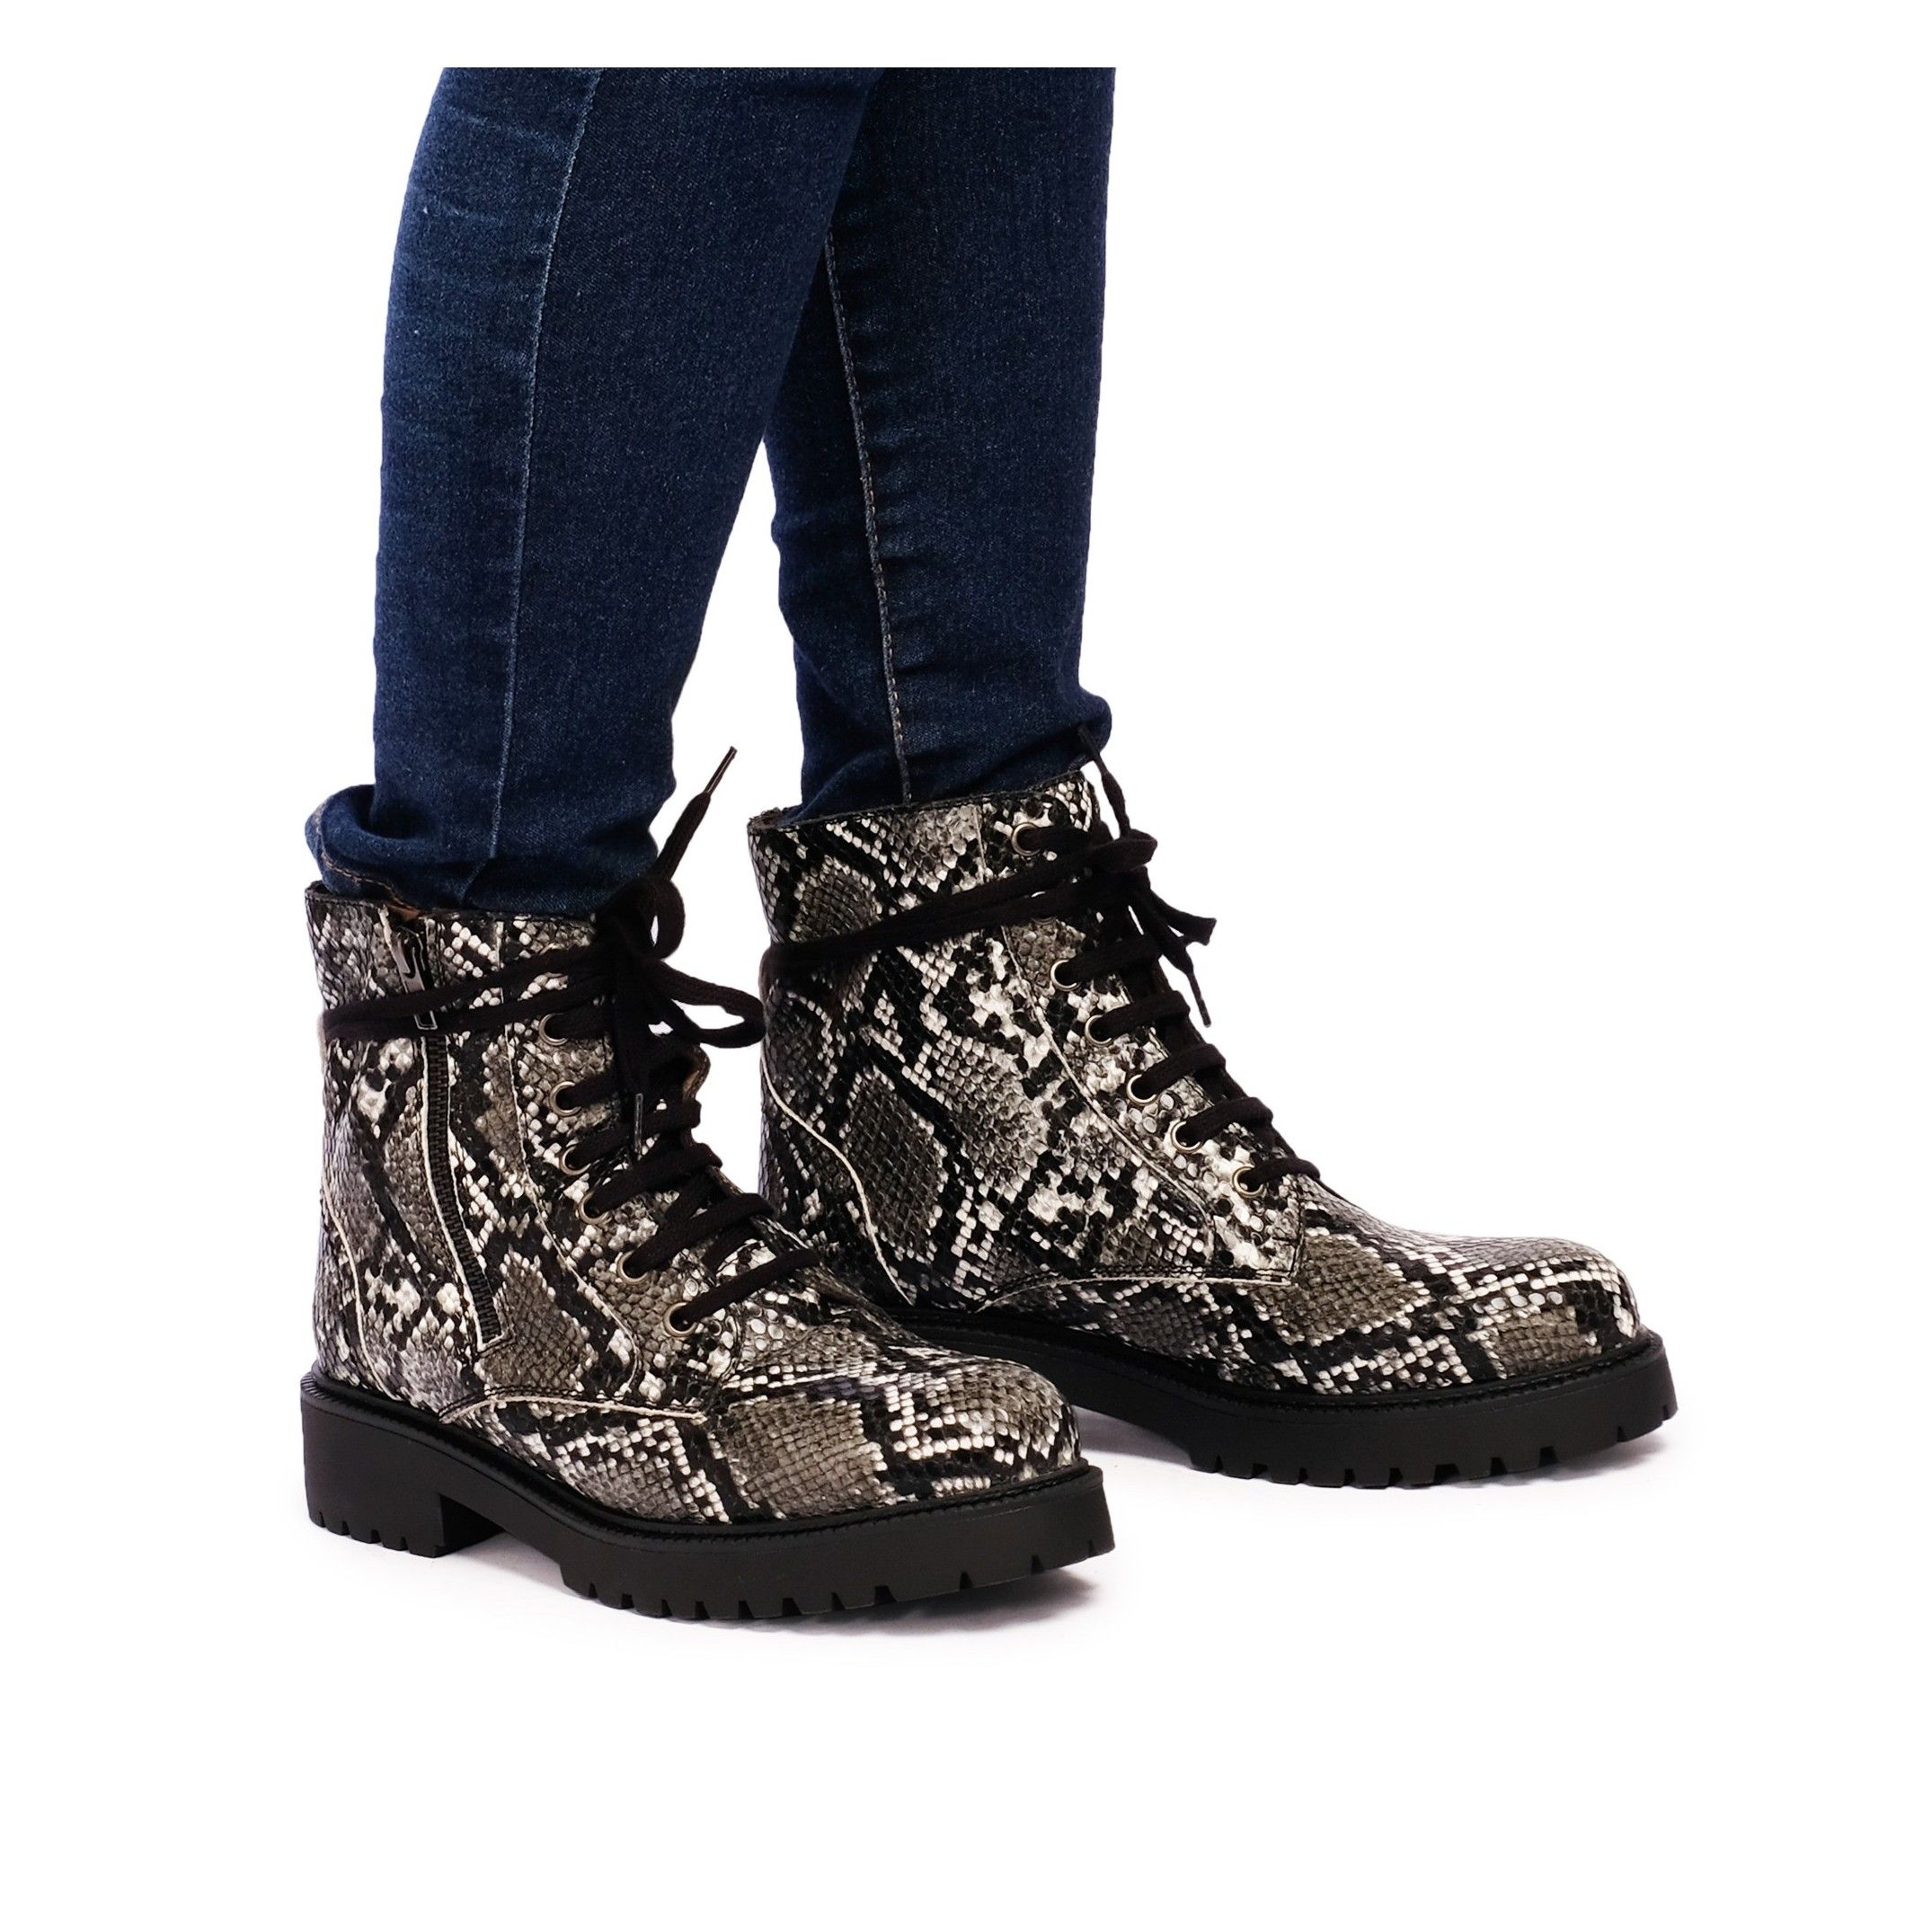 Leather Boots with laces and zipper closure. Snake style. Upper, inner and insole made of leather. Rubber sole. Platform: 2 cm. Wedge: 3,5 cm.